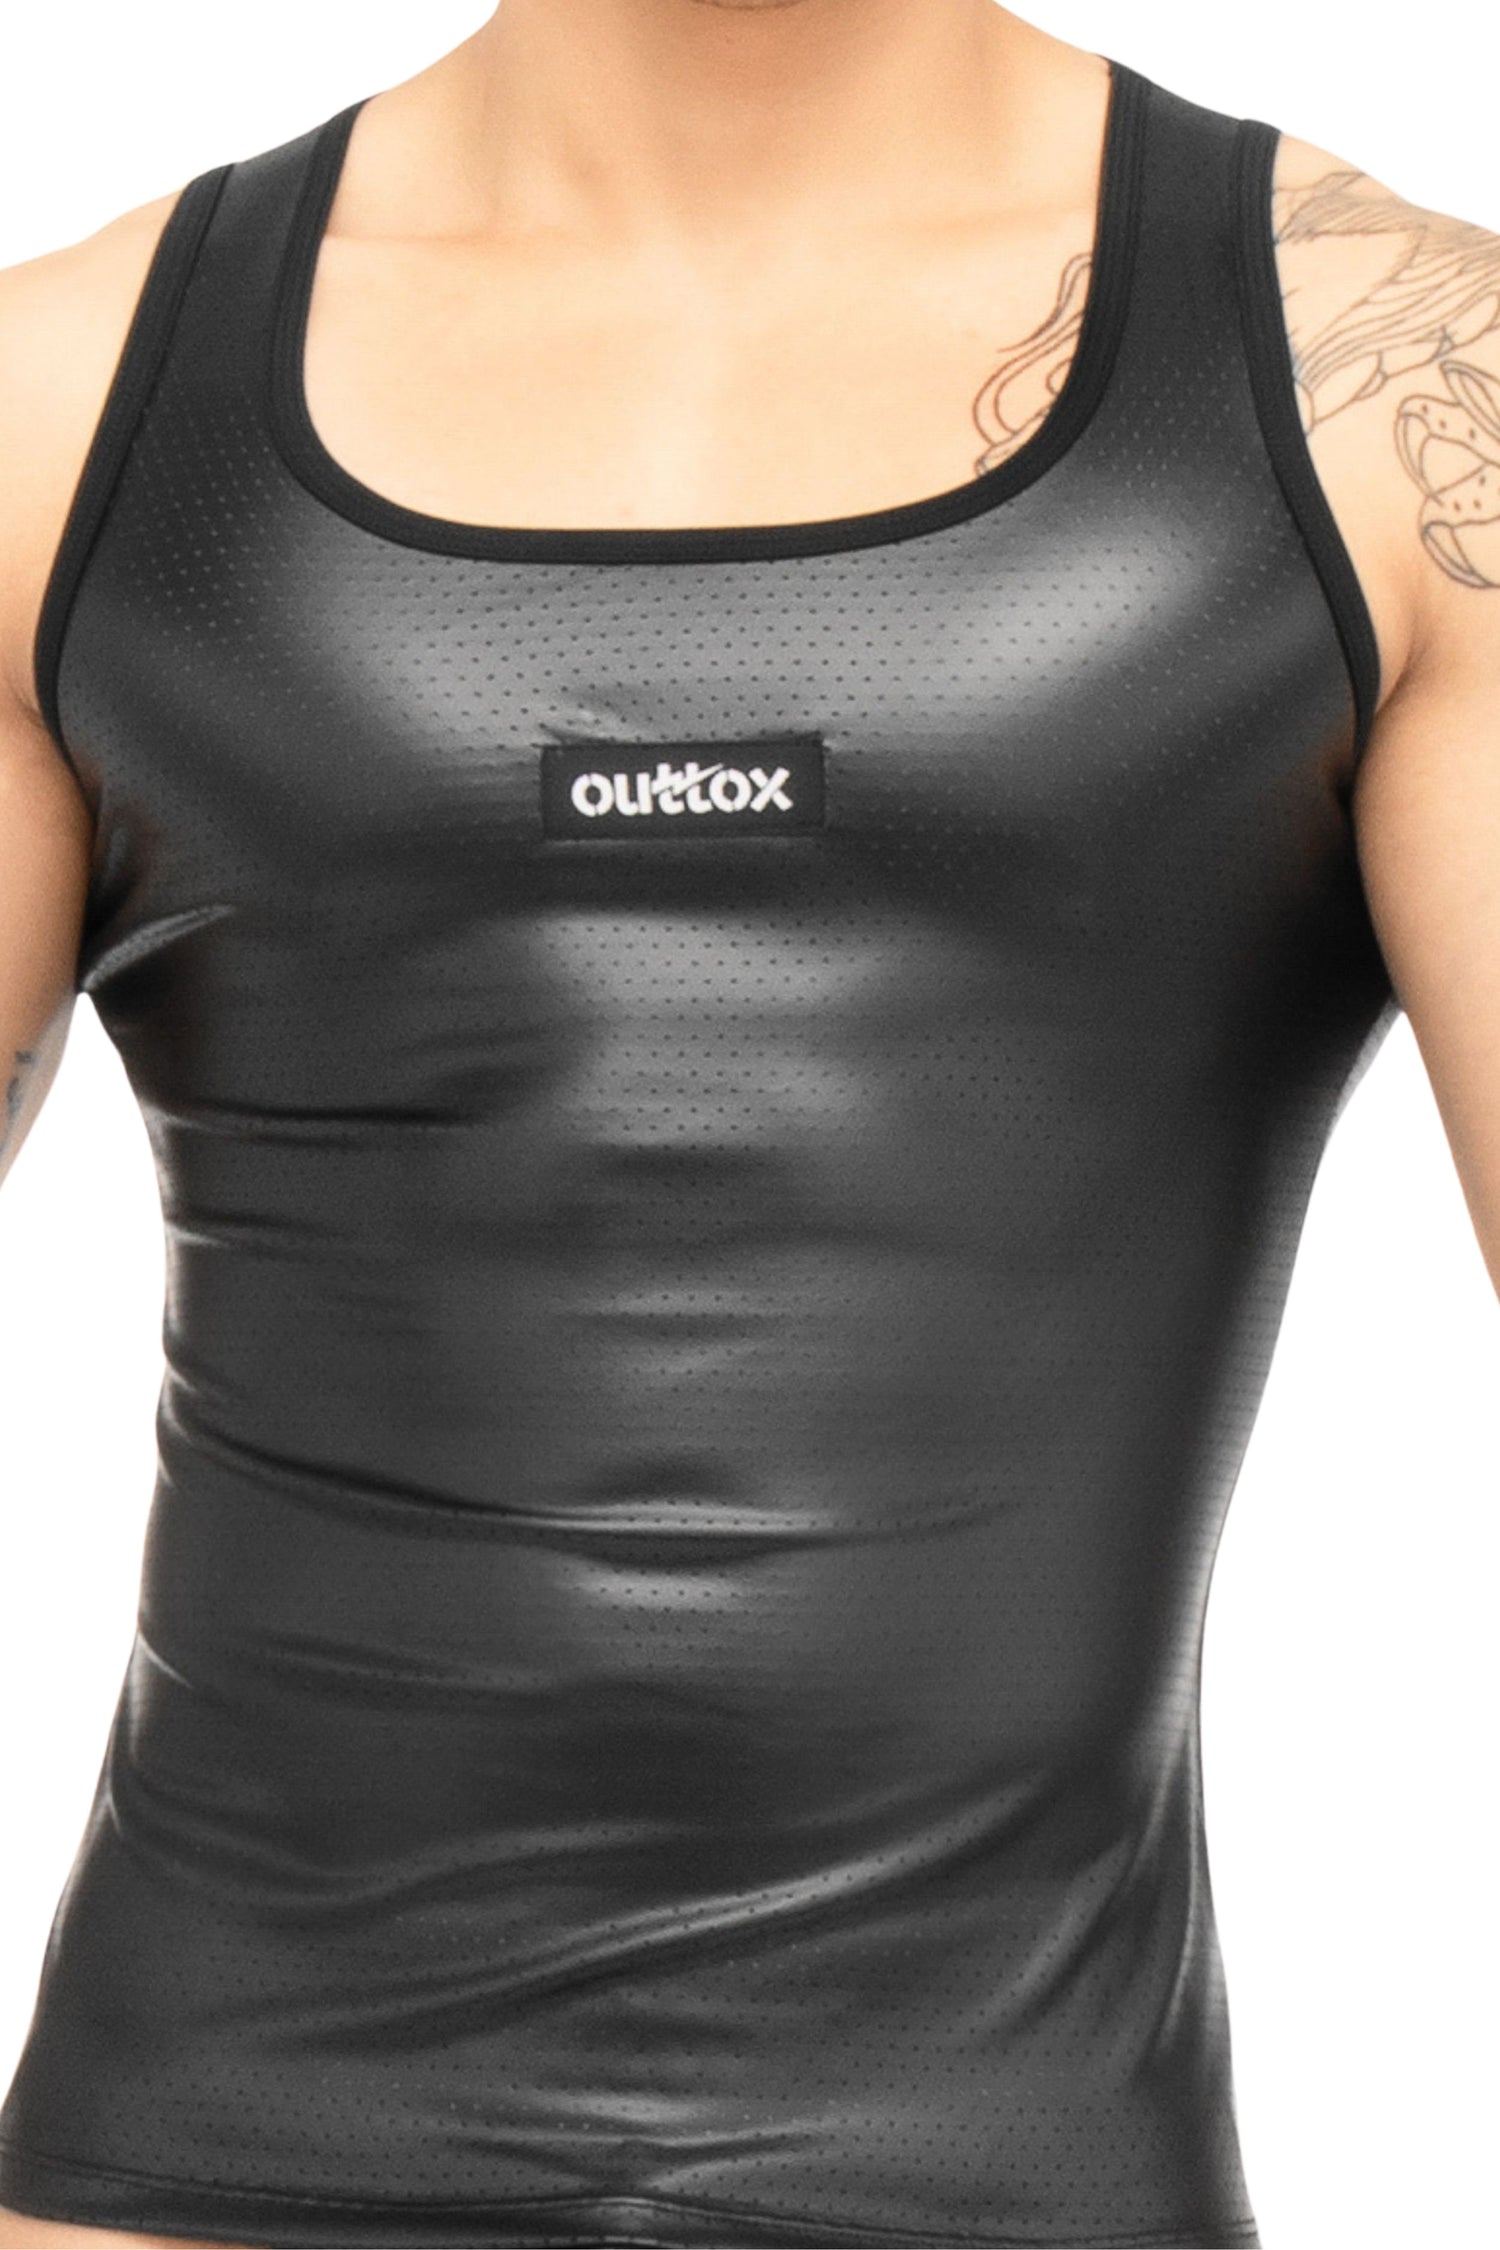 Outtox. Tank top. Black